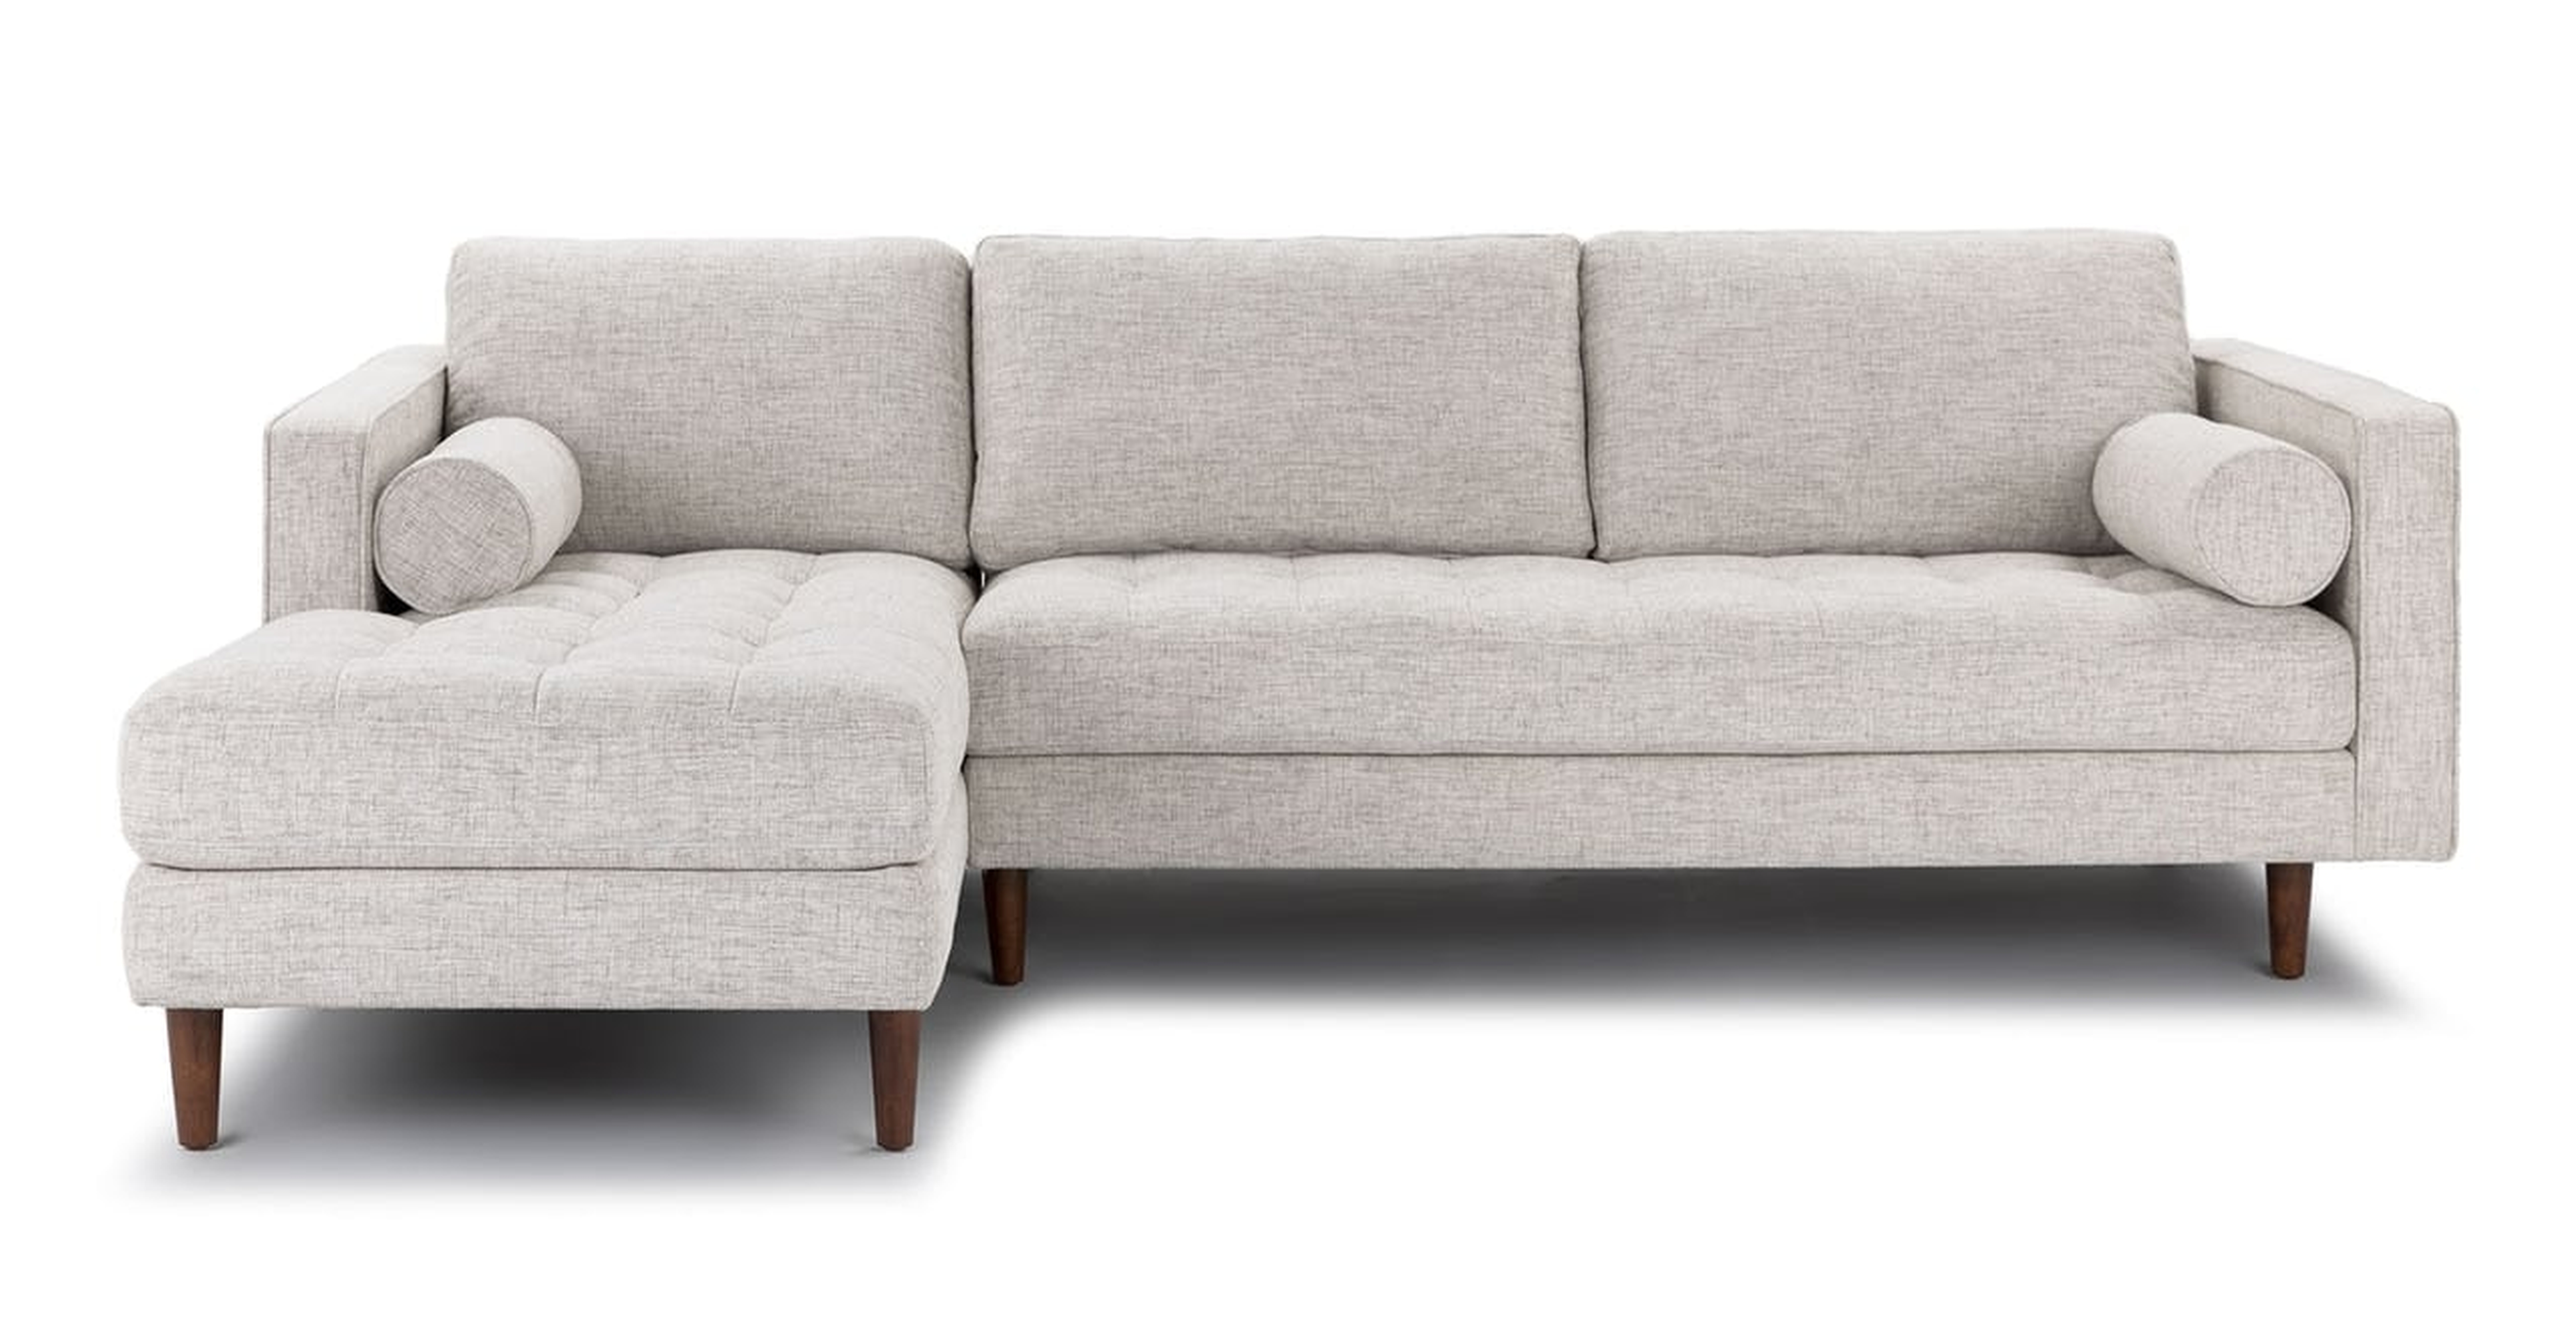 Sven Birch Ivory Left Sectional Sofa - Article